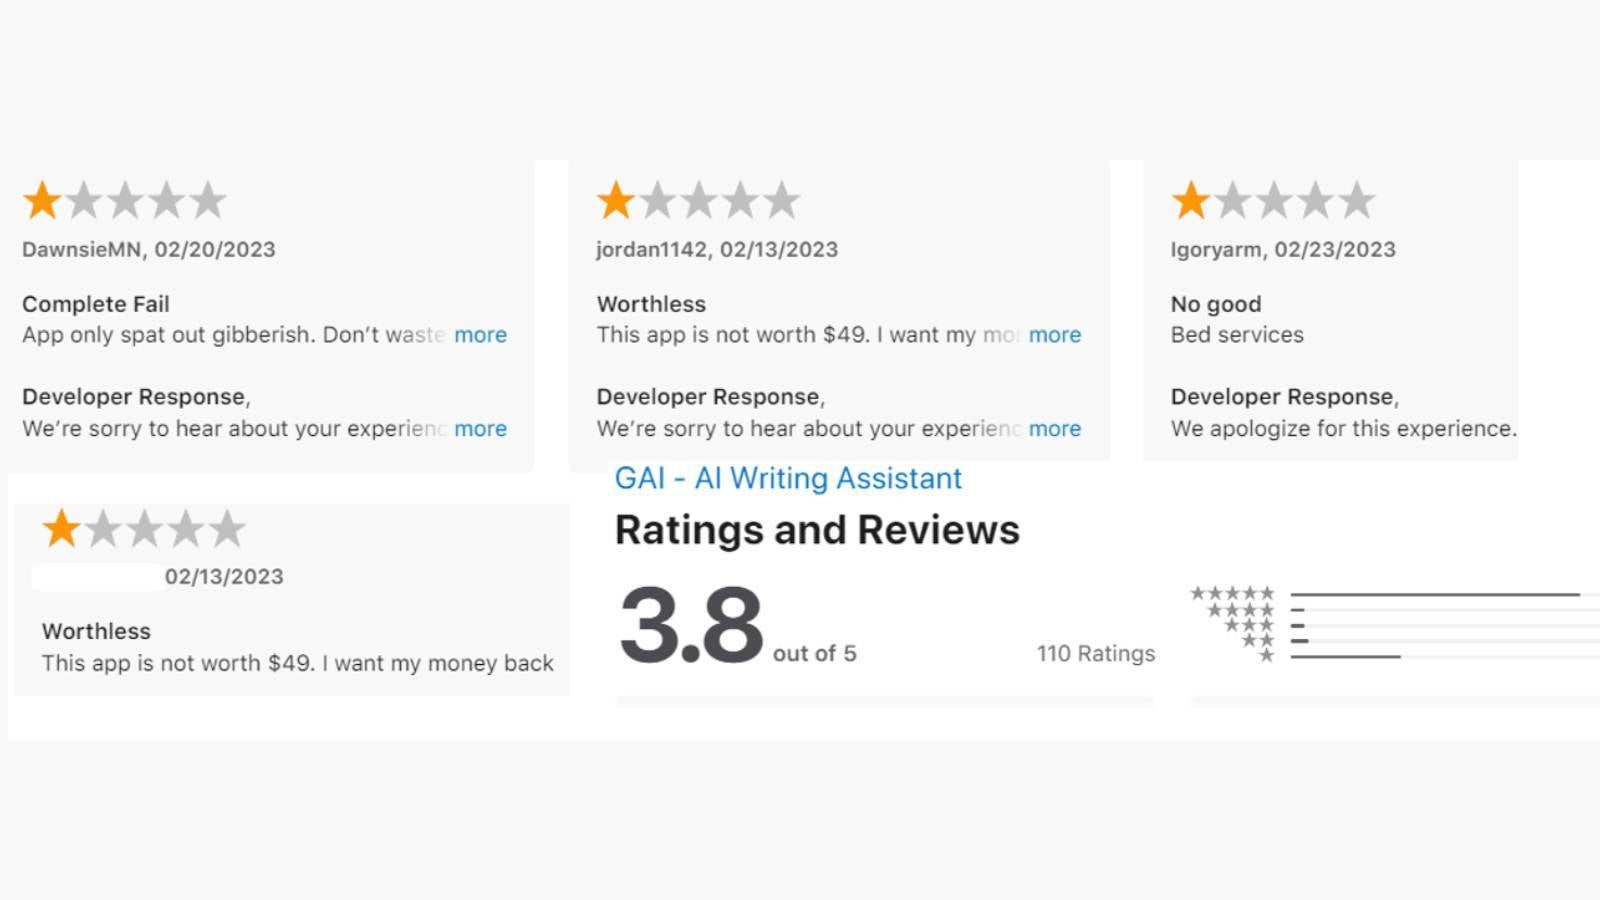 Fake reviews for fake ChatGPT apps hide legitimate negative review - You must delete these fake ChatGPT apps swindling users out of thousands of dollars each month